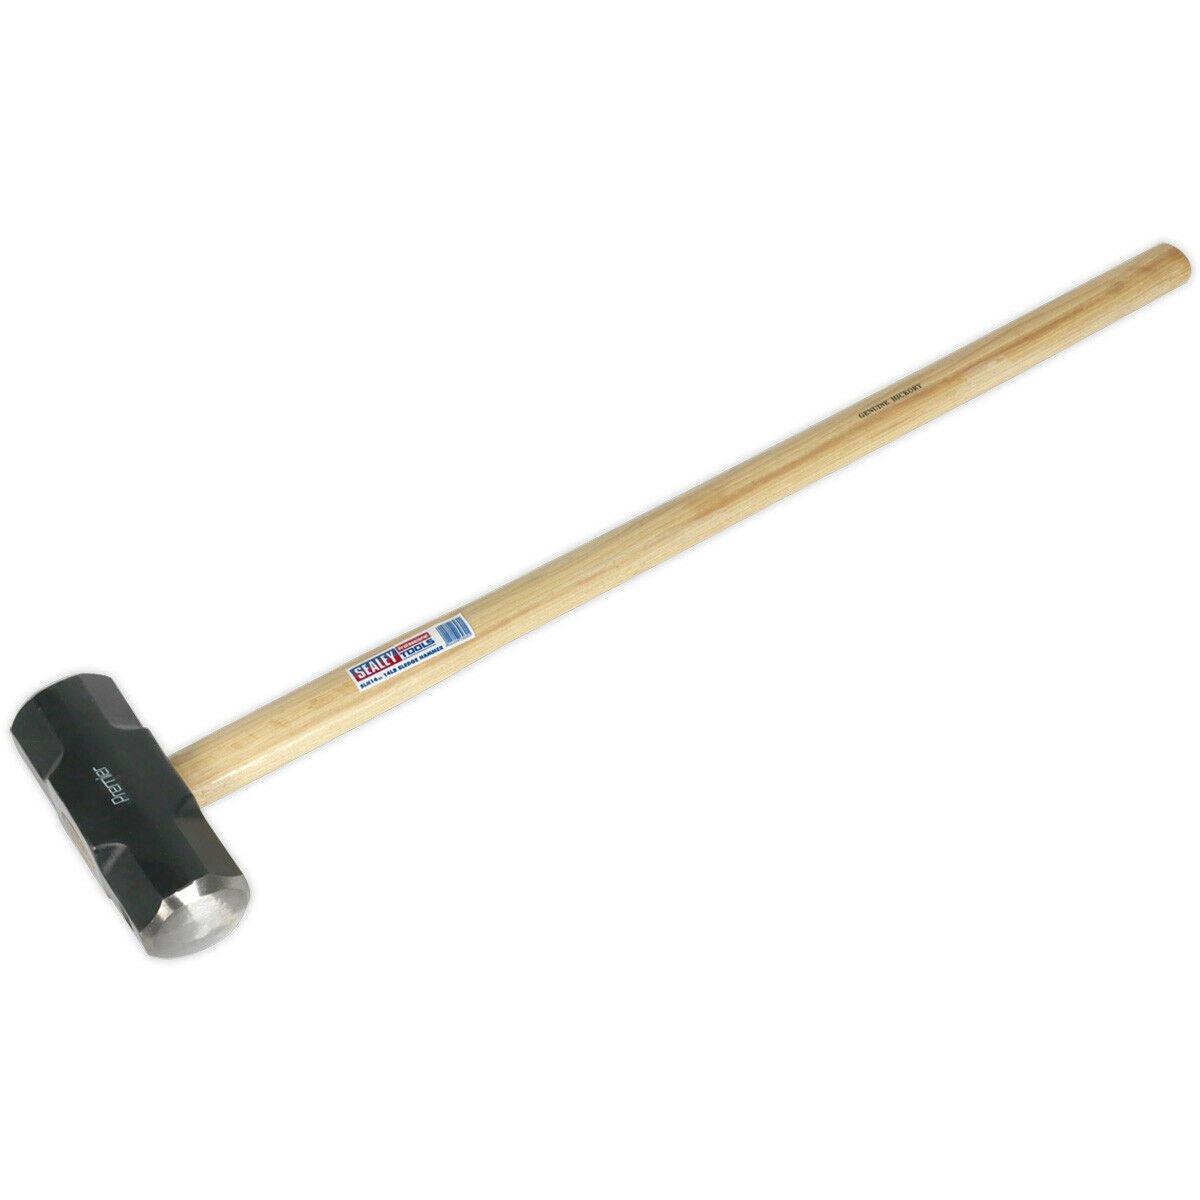 14lb Hardened Sledge Hammer - Hickory Wooden Shaft - Drop Forged Carbon Steel